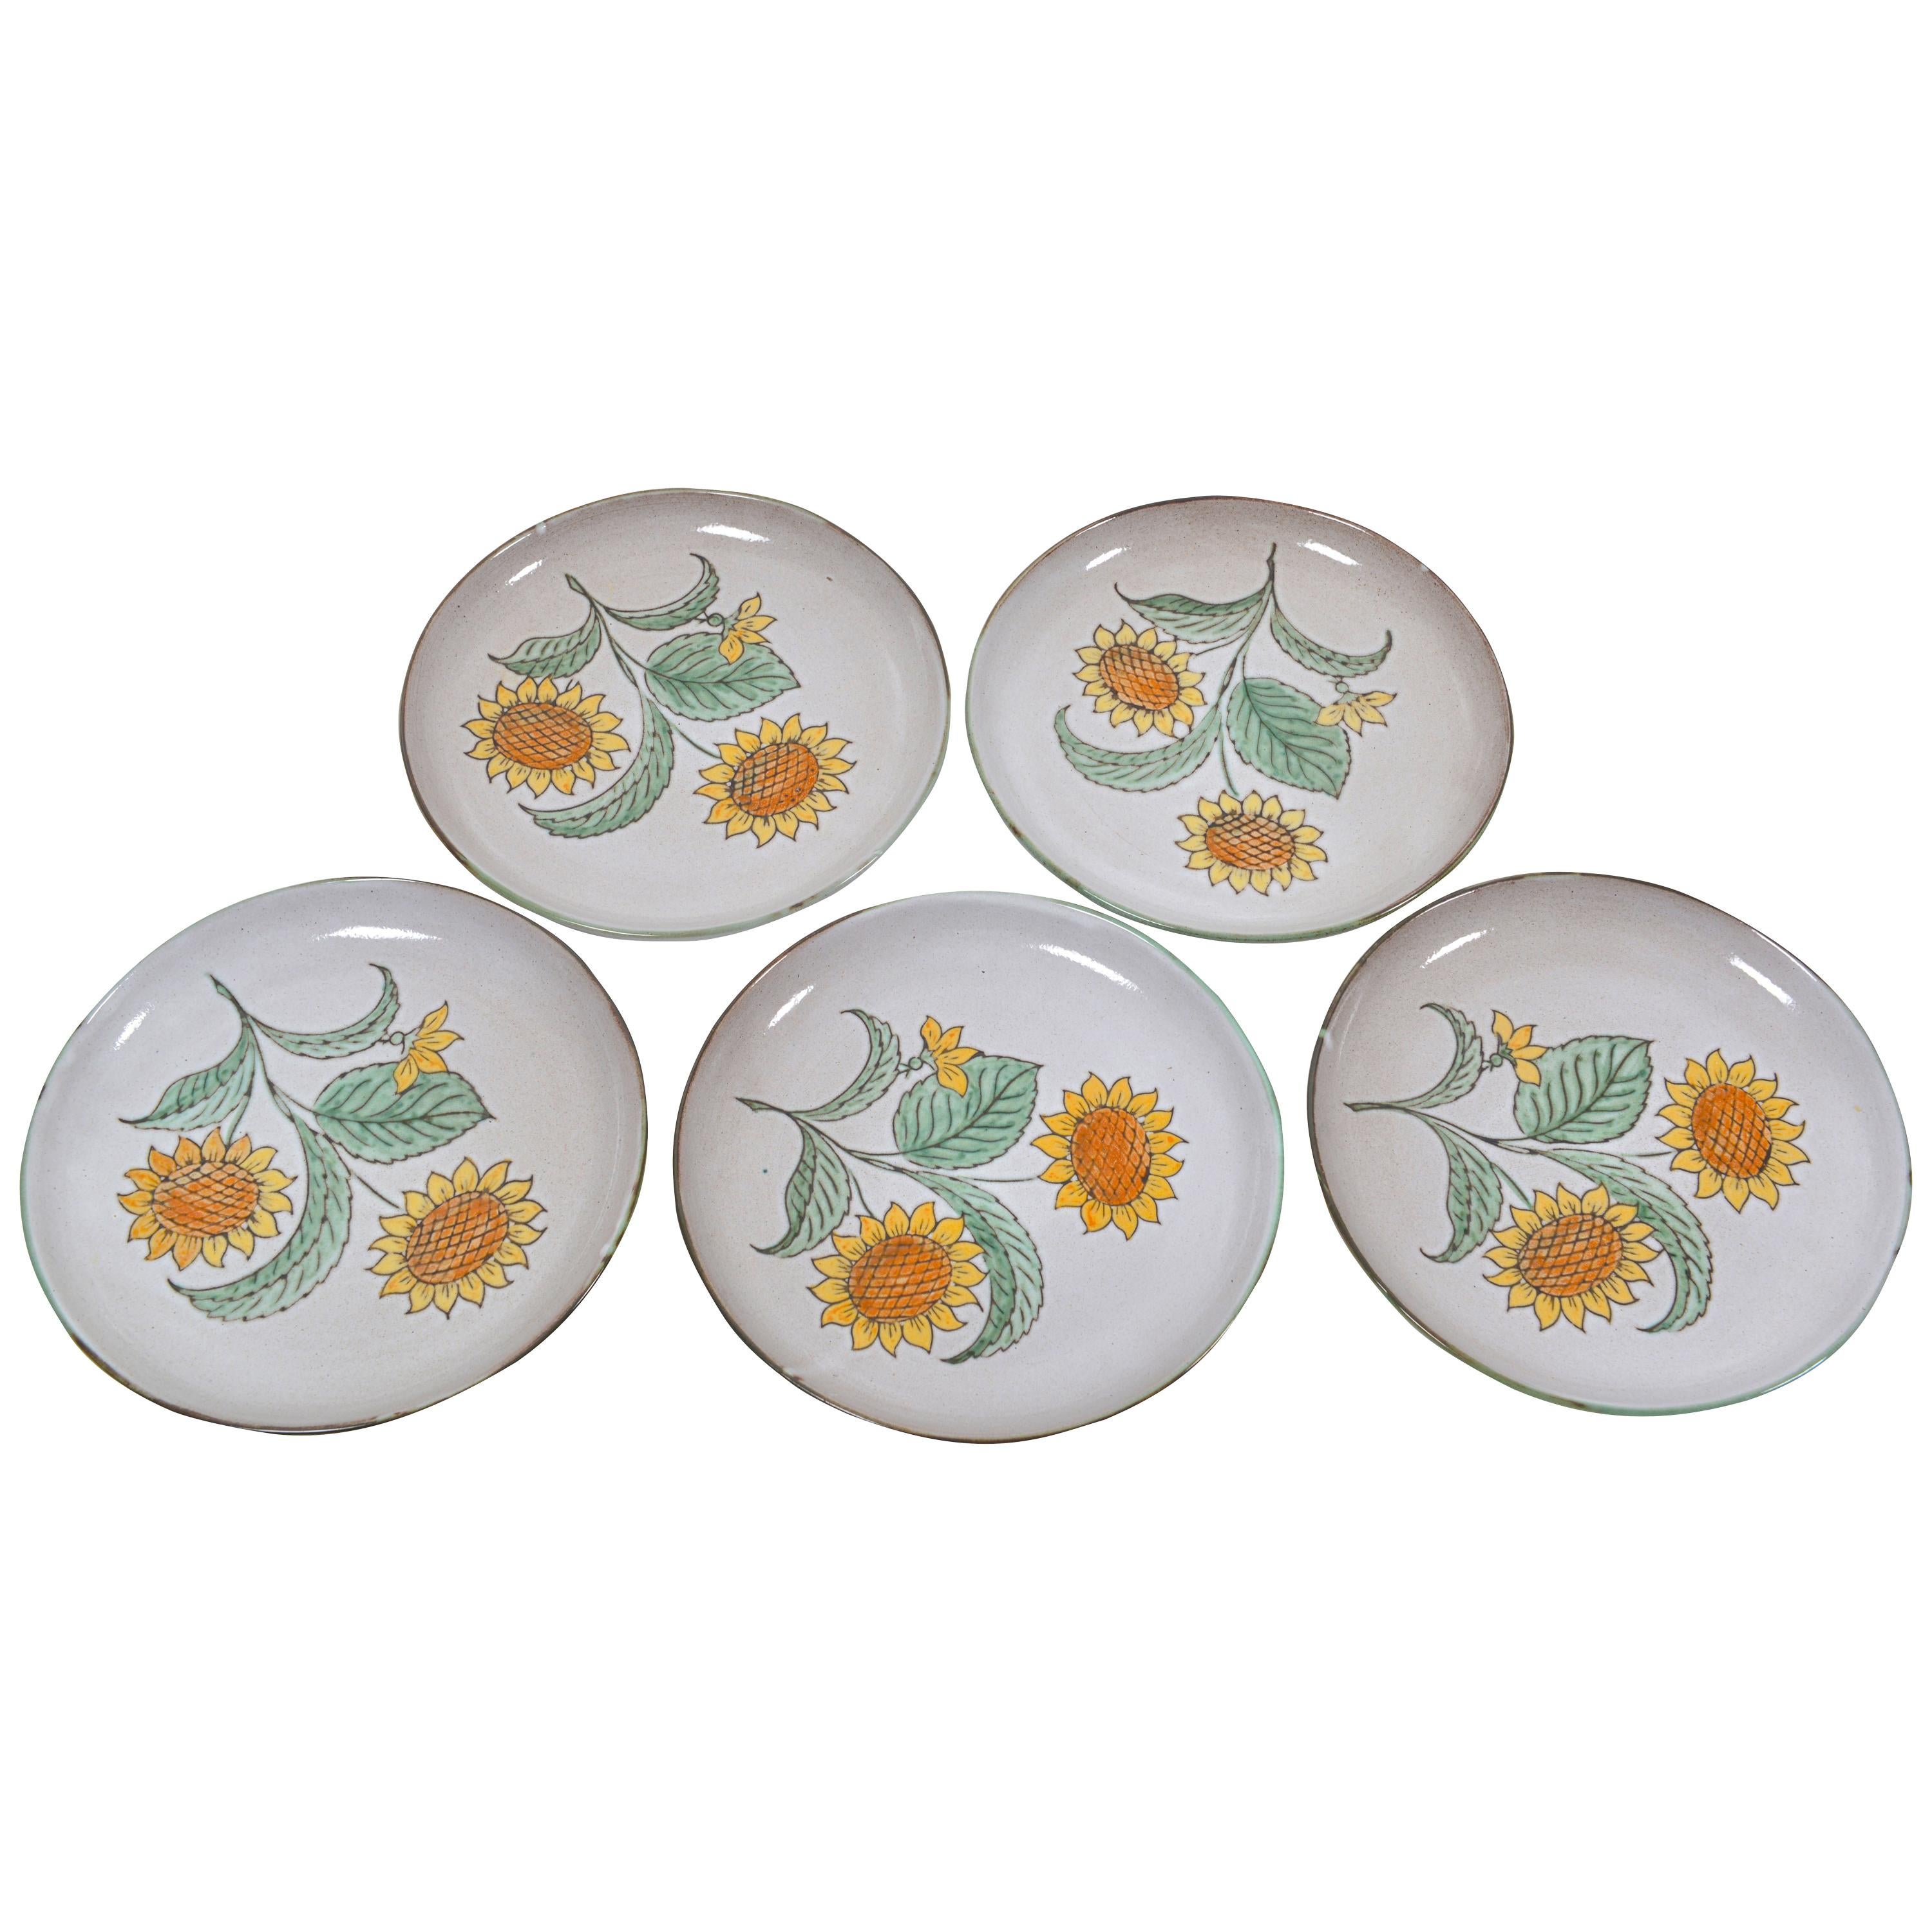 Set of 5 French Midcentury Sunflower Plates, circa 1950 For Sale